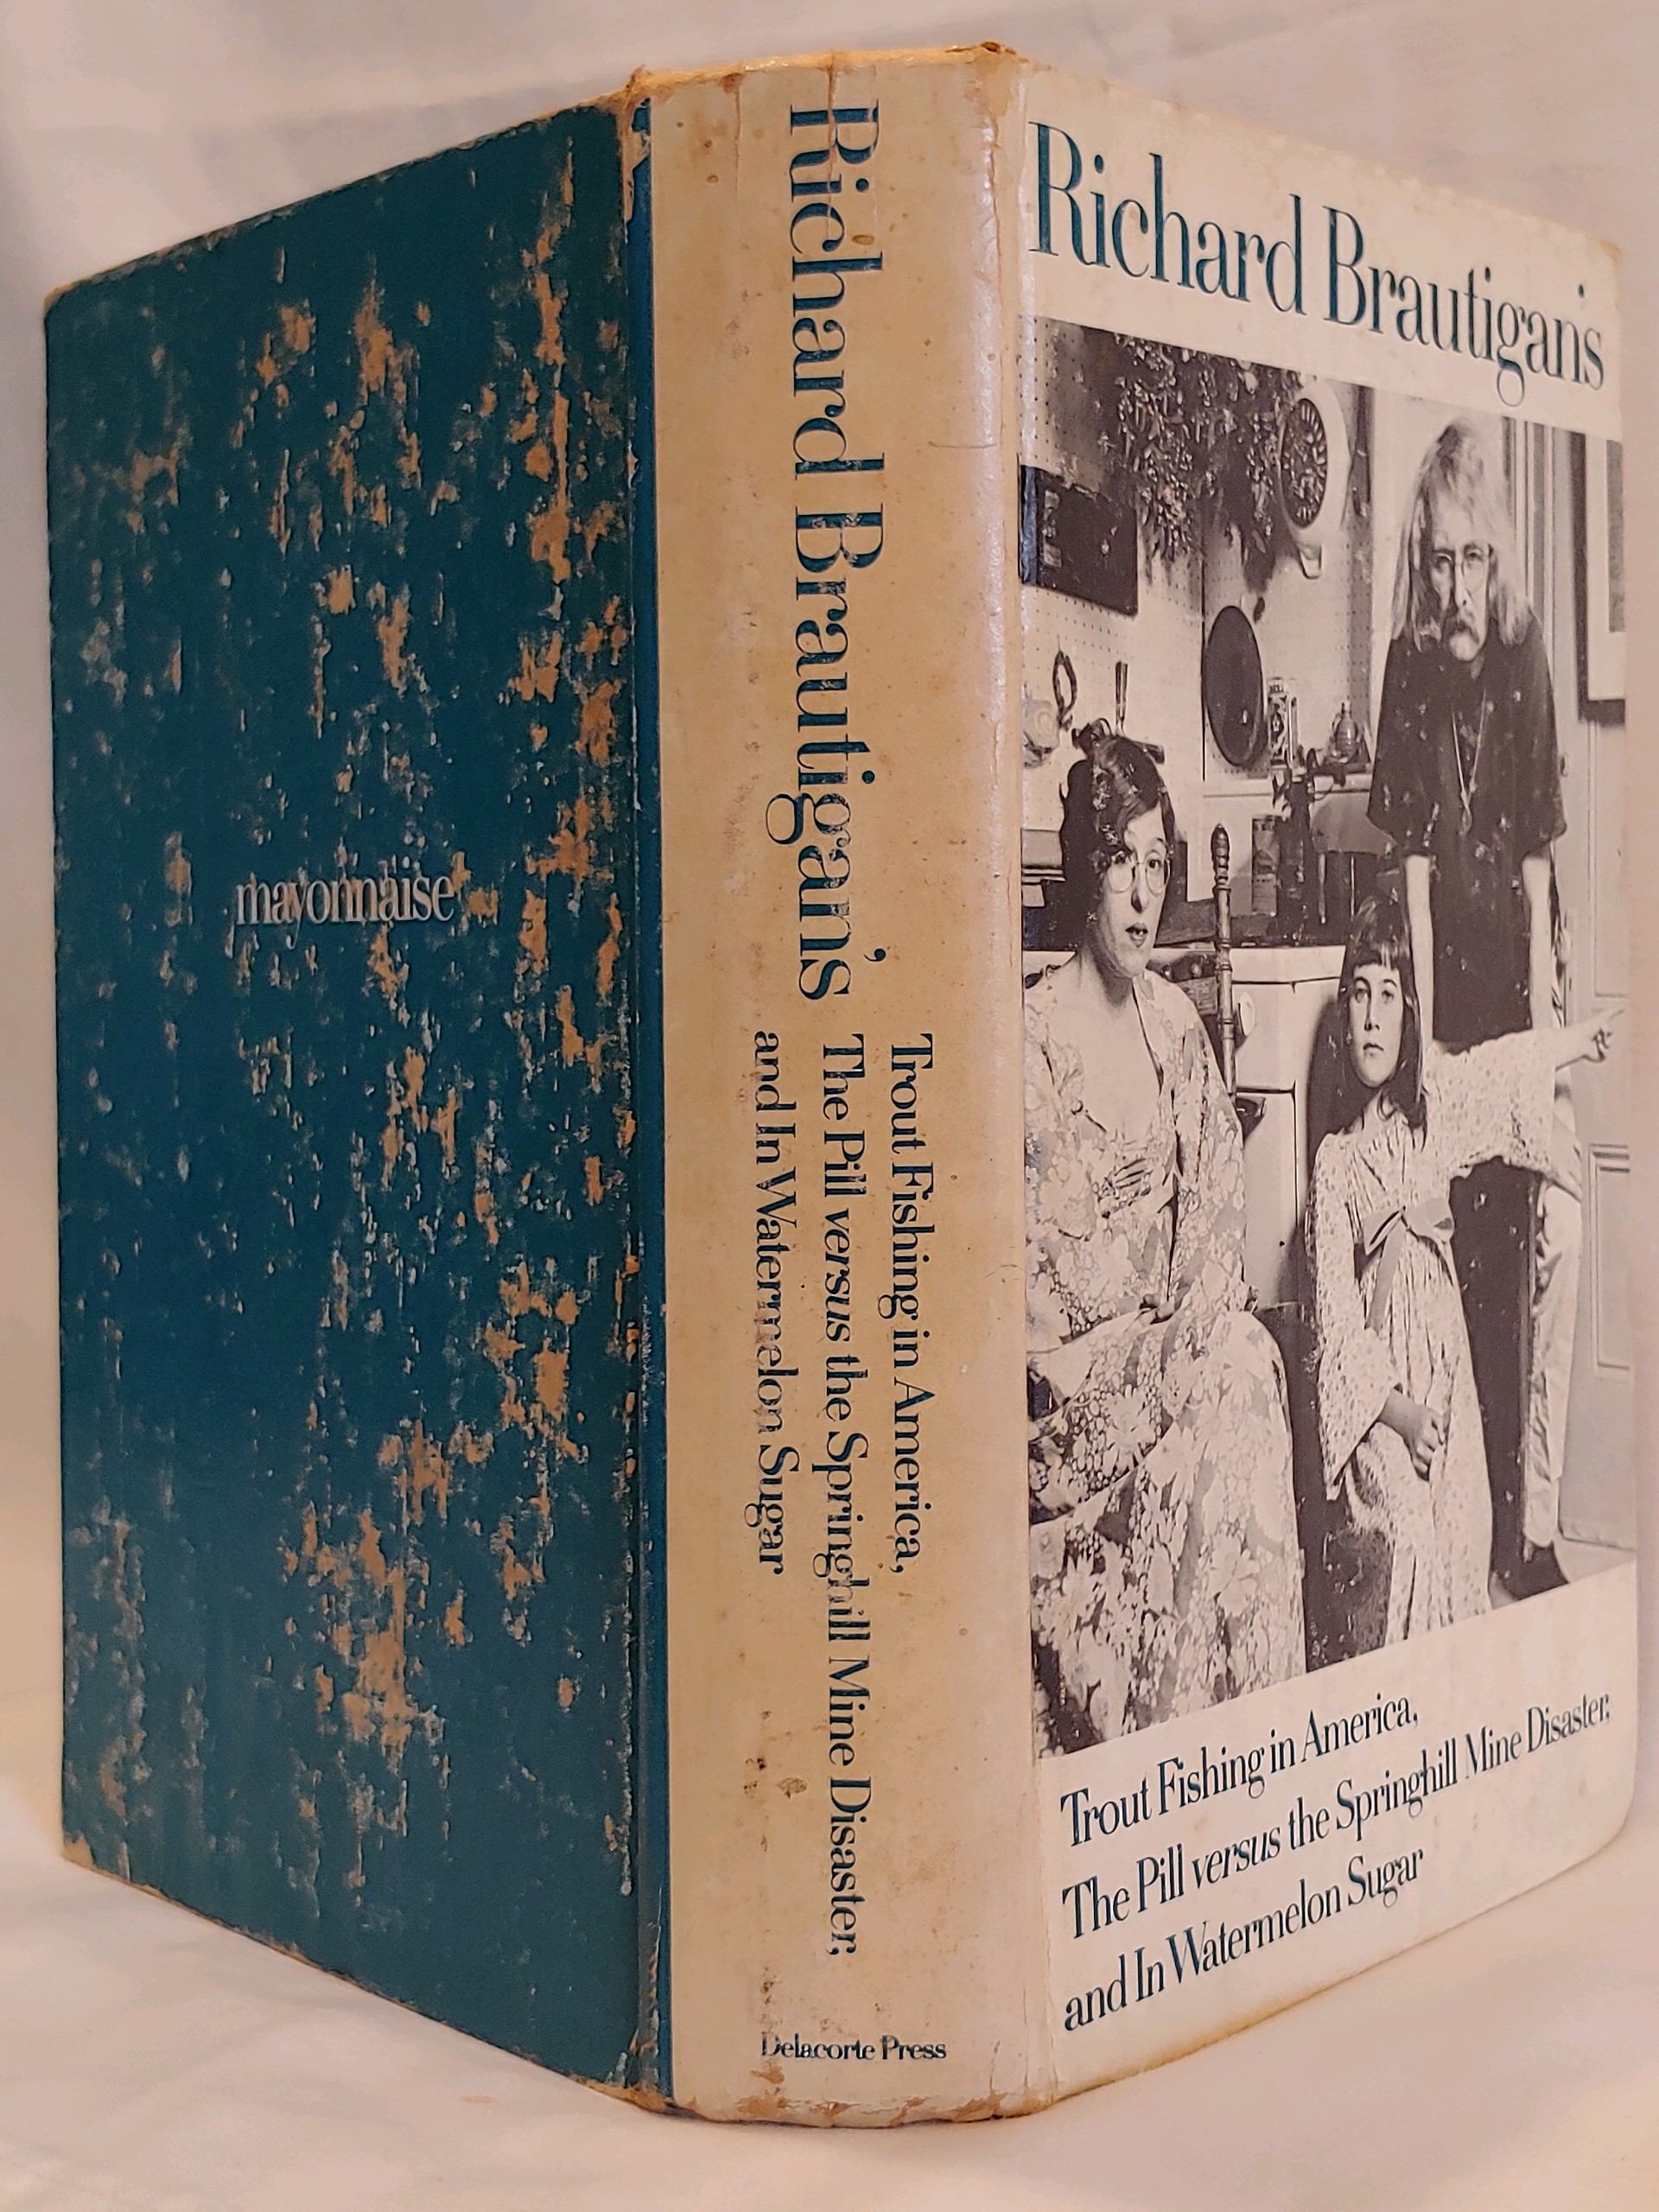 Richard Brautigan's: Trout Fishing in America, The Pill versus the  Springhill Mine Disaster, and In Watermelon Sugar by Brautigan, Richard:  Good Hardcover (1971)